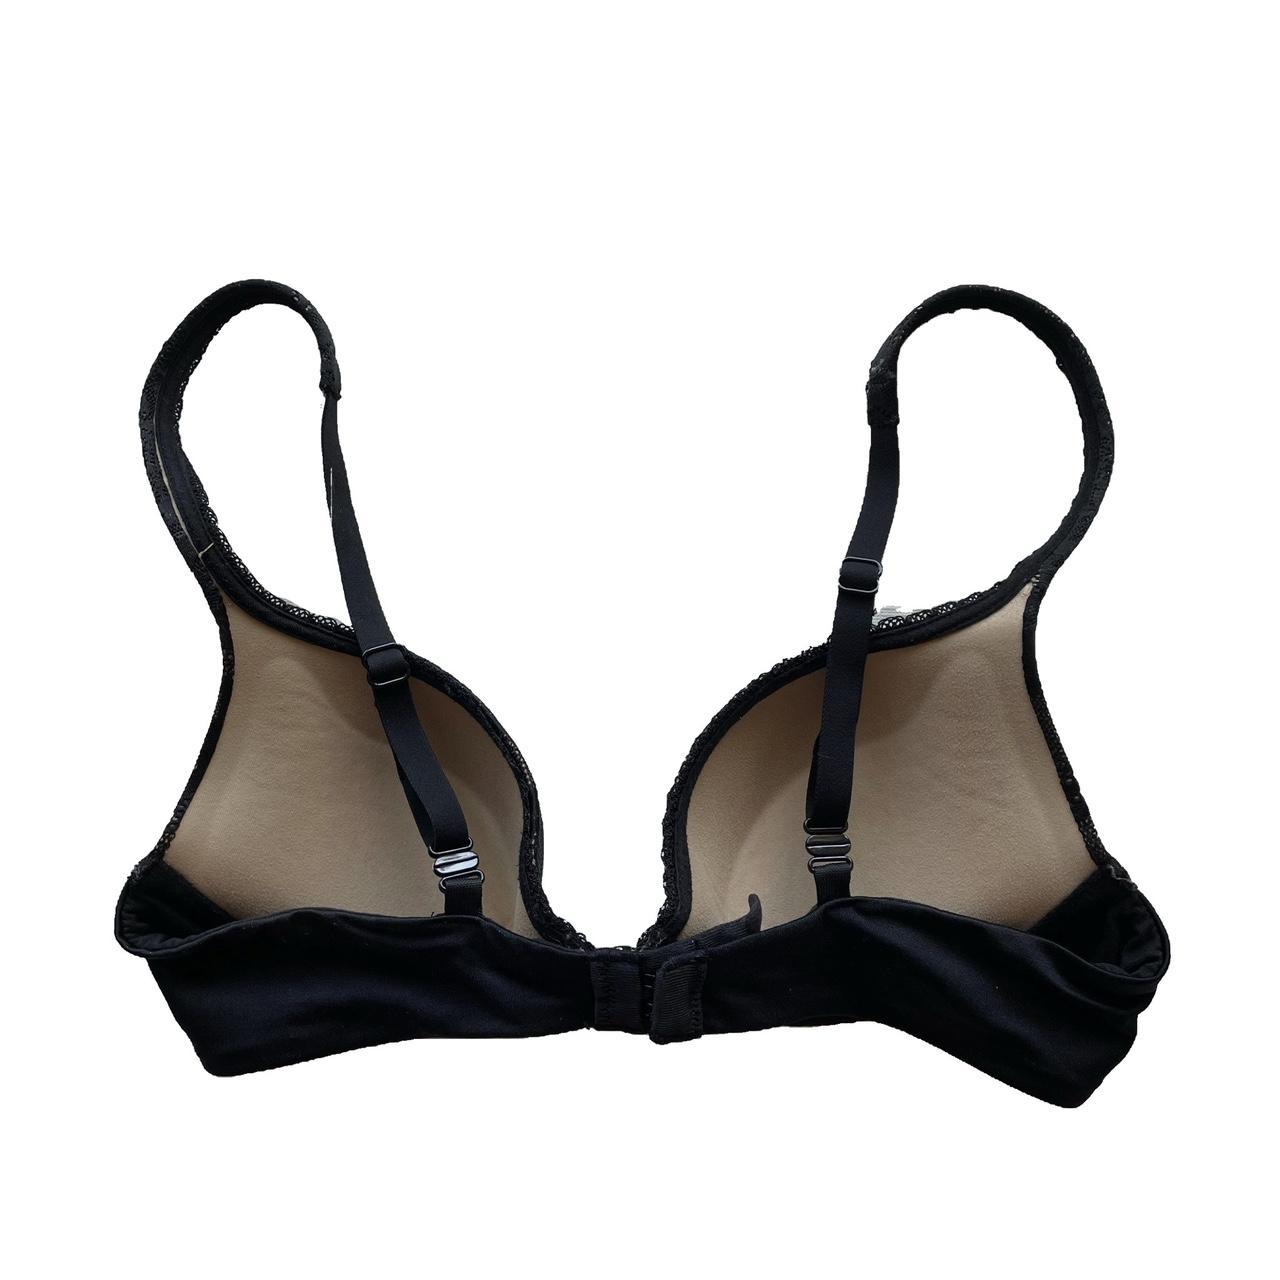 Product Image 2 - MAIDENFORM BLACK LACE-LINED PADDED PUSH-UP